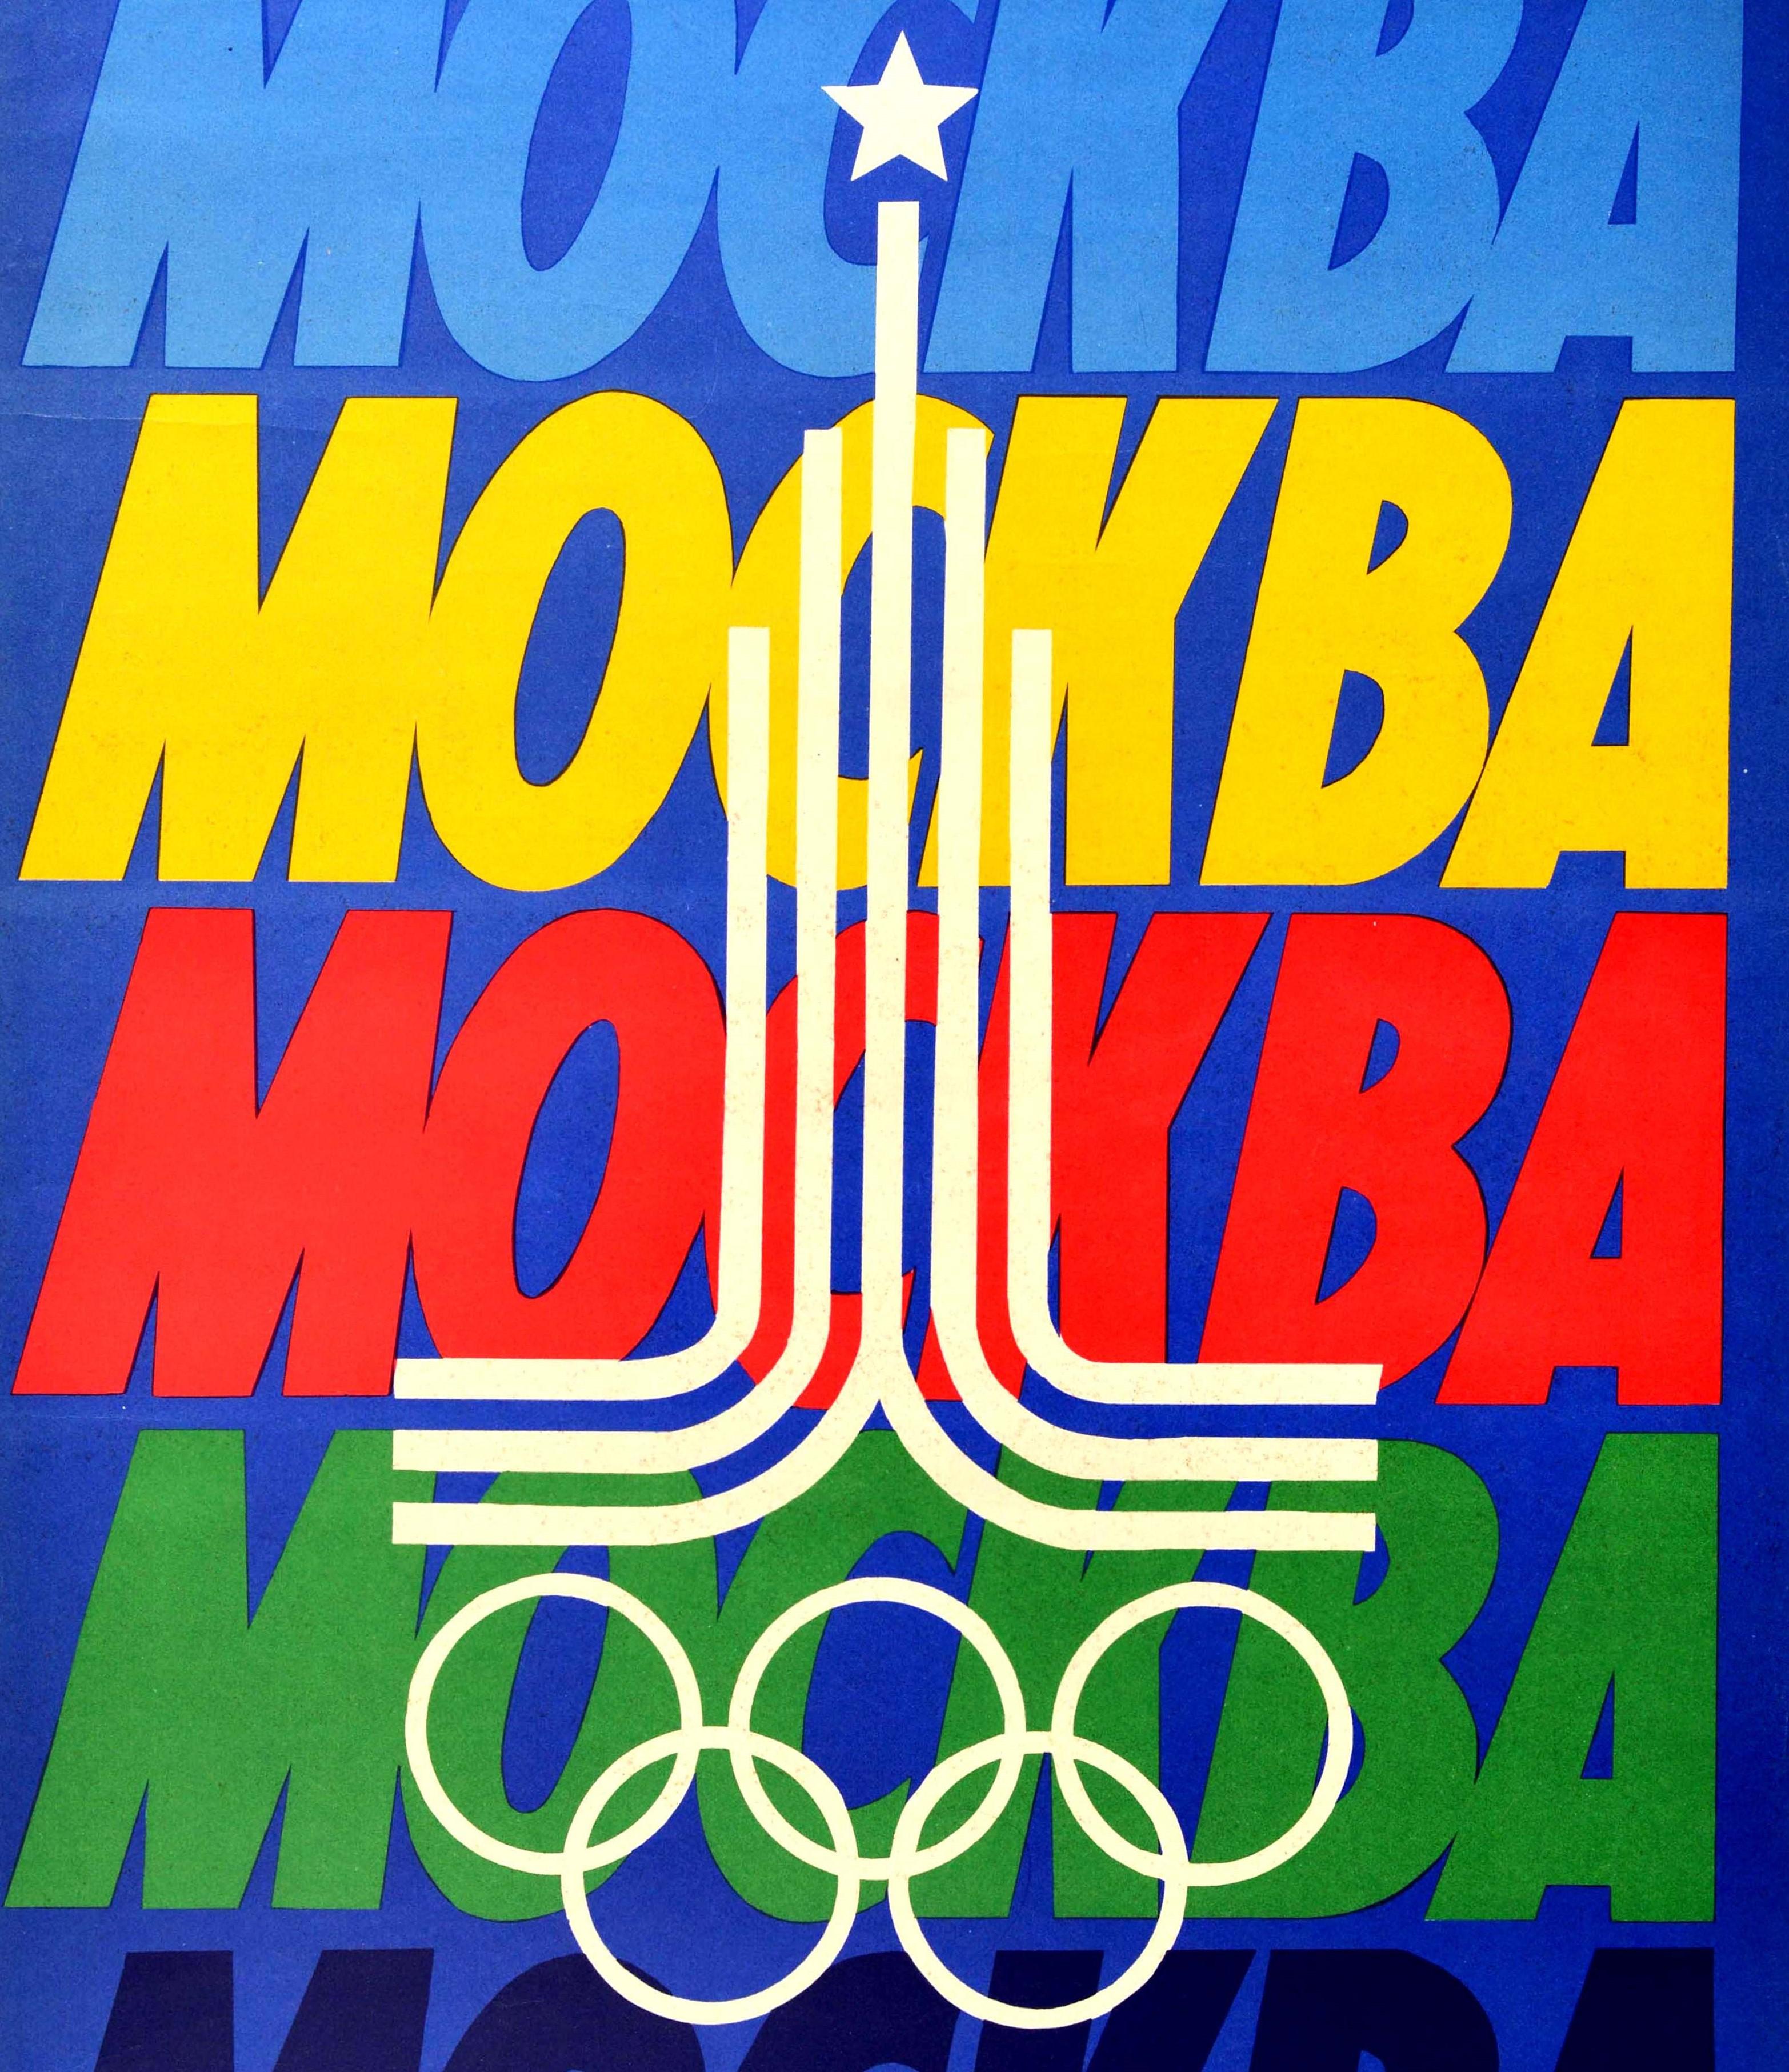 Original vintage sport poster promoting the 22nd Summer Olympic Games / Games of the XXII Olympiad in 1980 held in Moscow Russia featuring the title Москва / Moskva / Moscow in bold lettering in light and dark blue, yellow, green and red against a